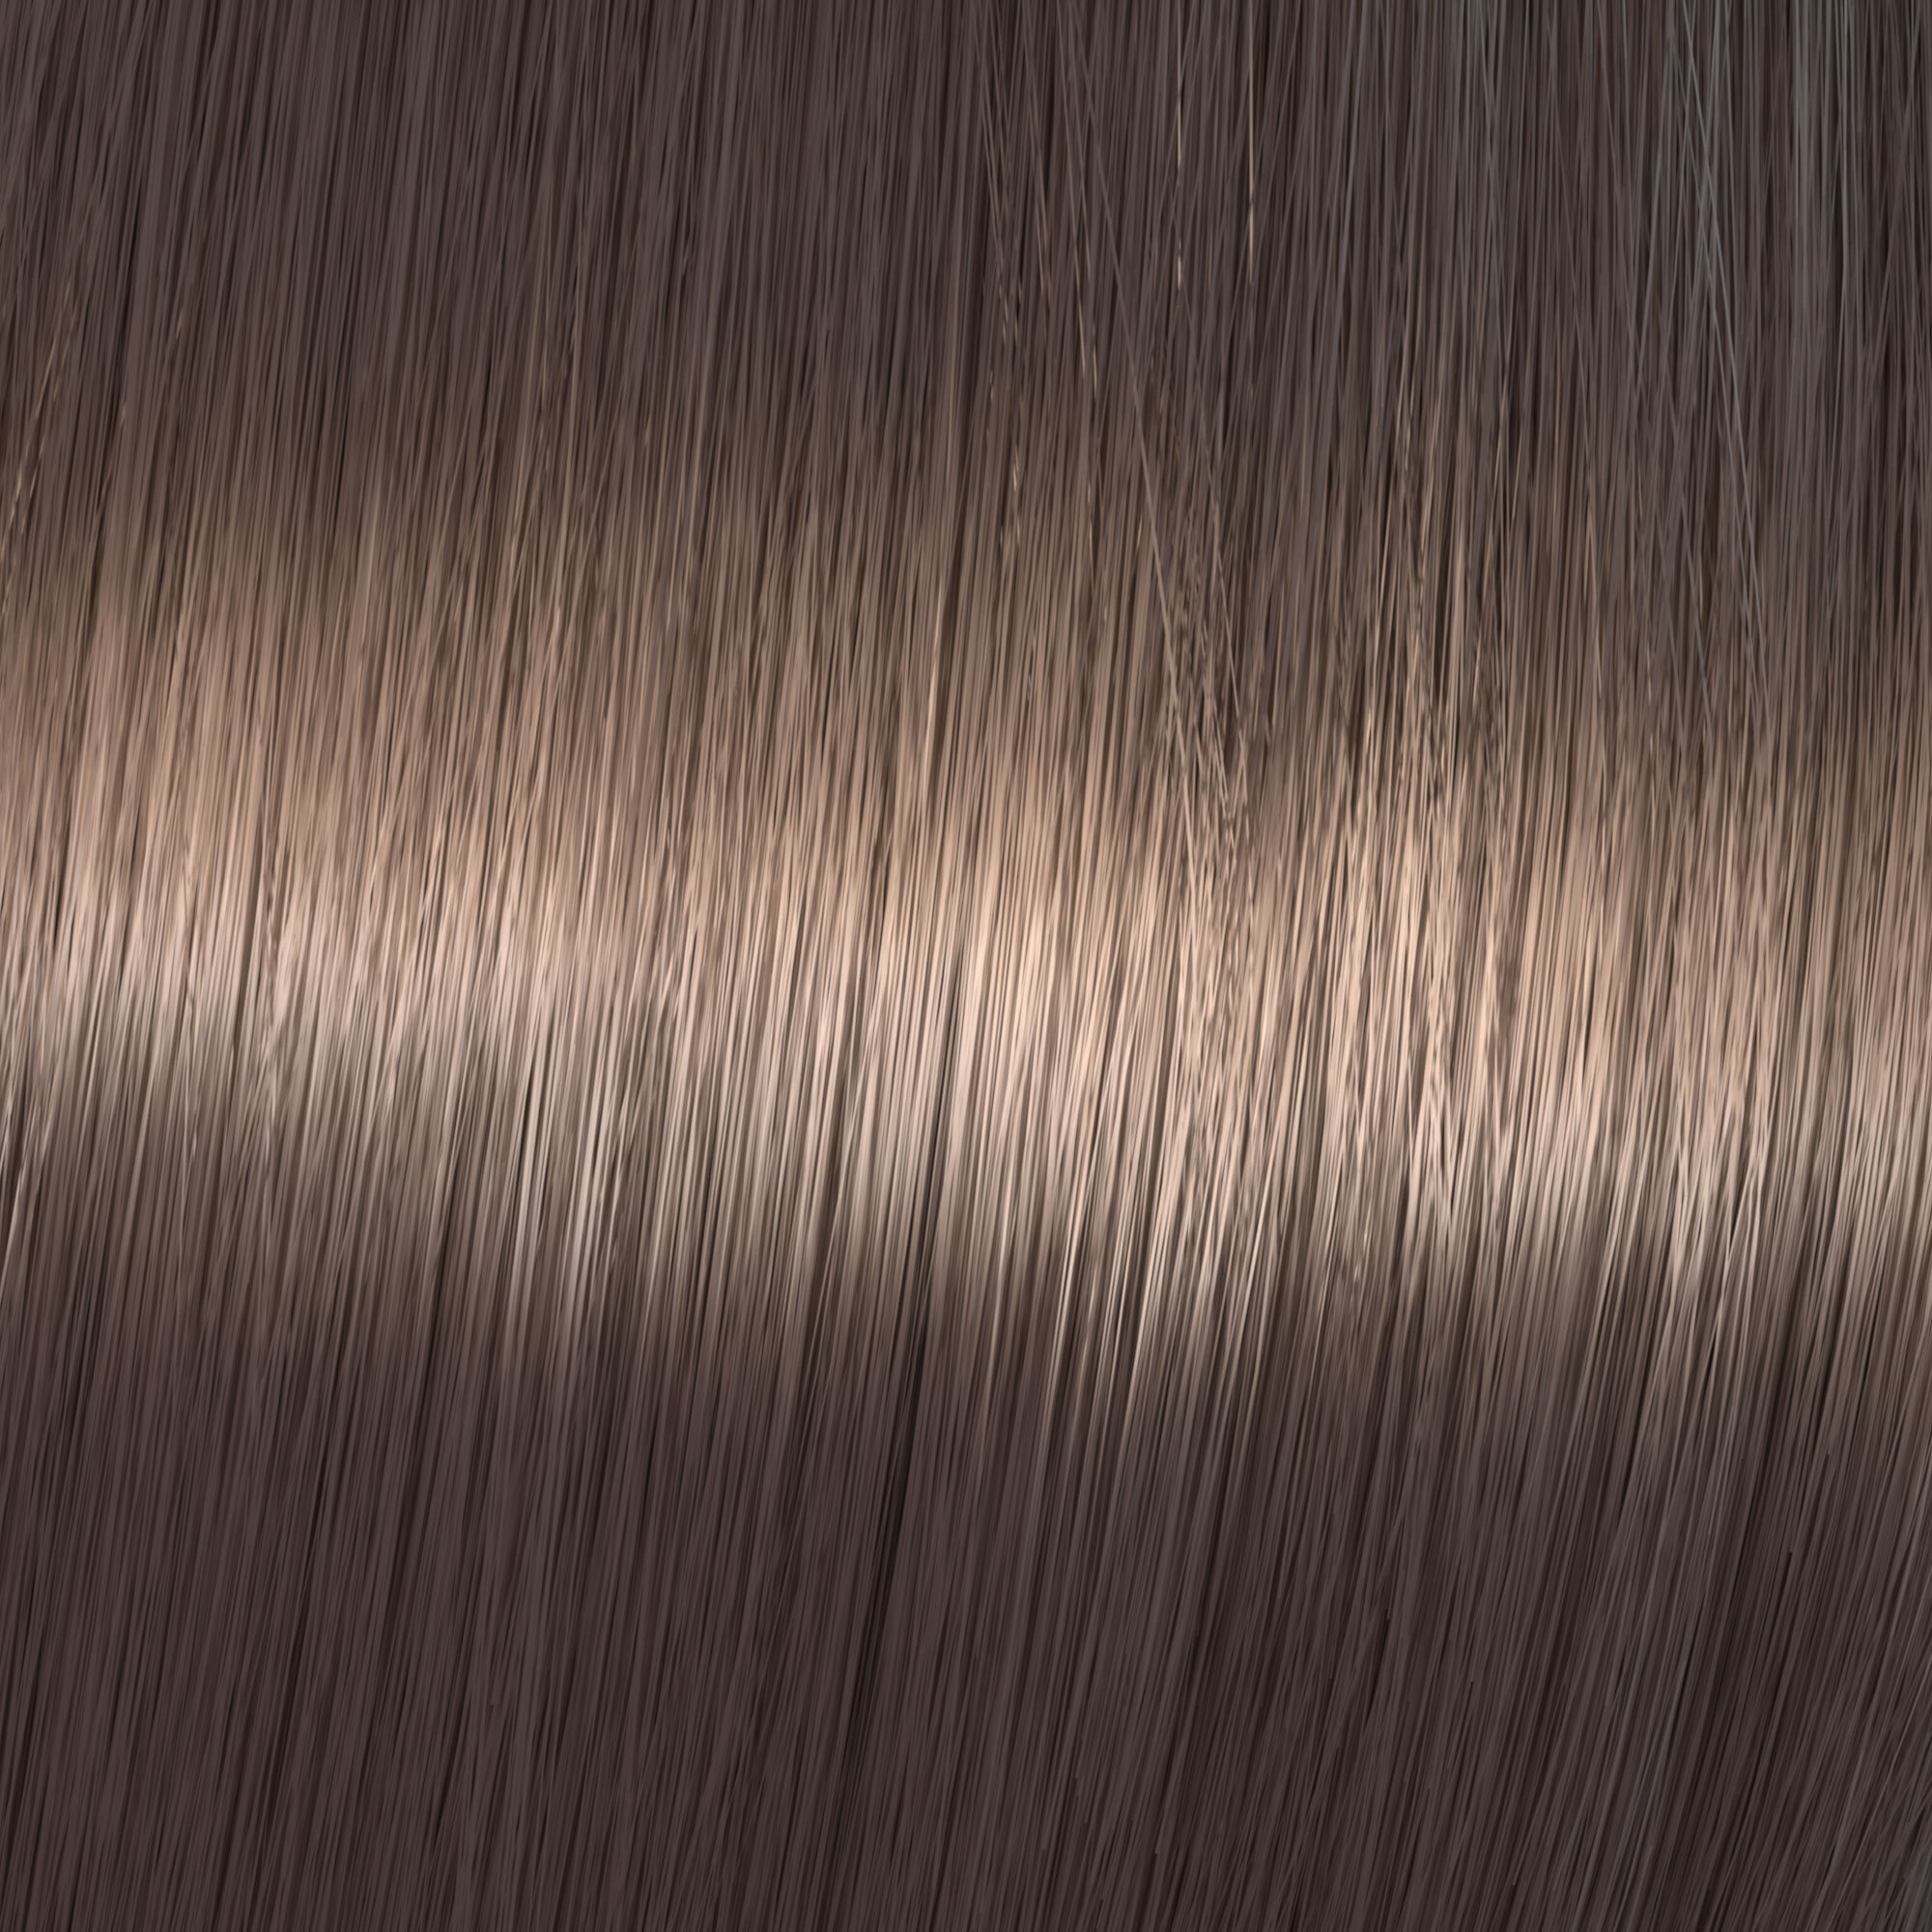 light brown hair color chart wella